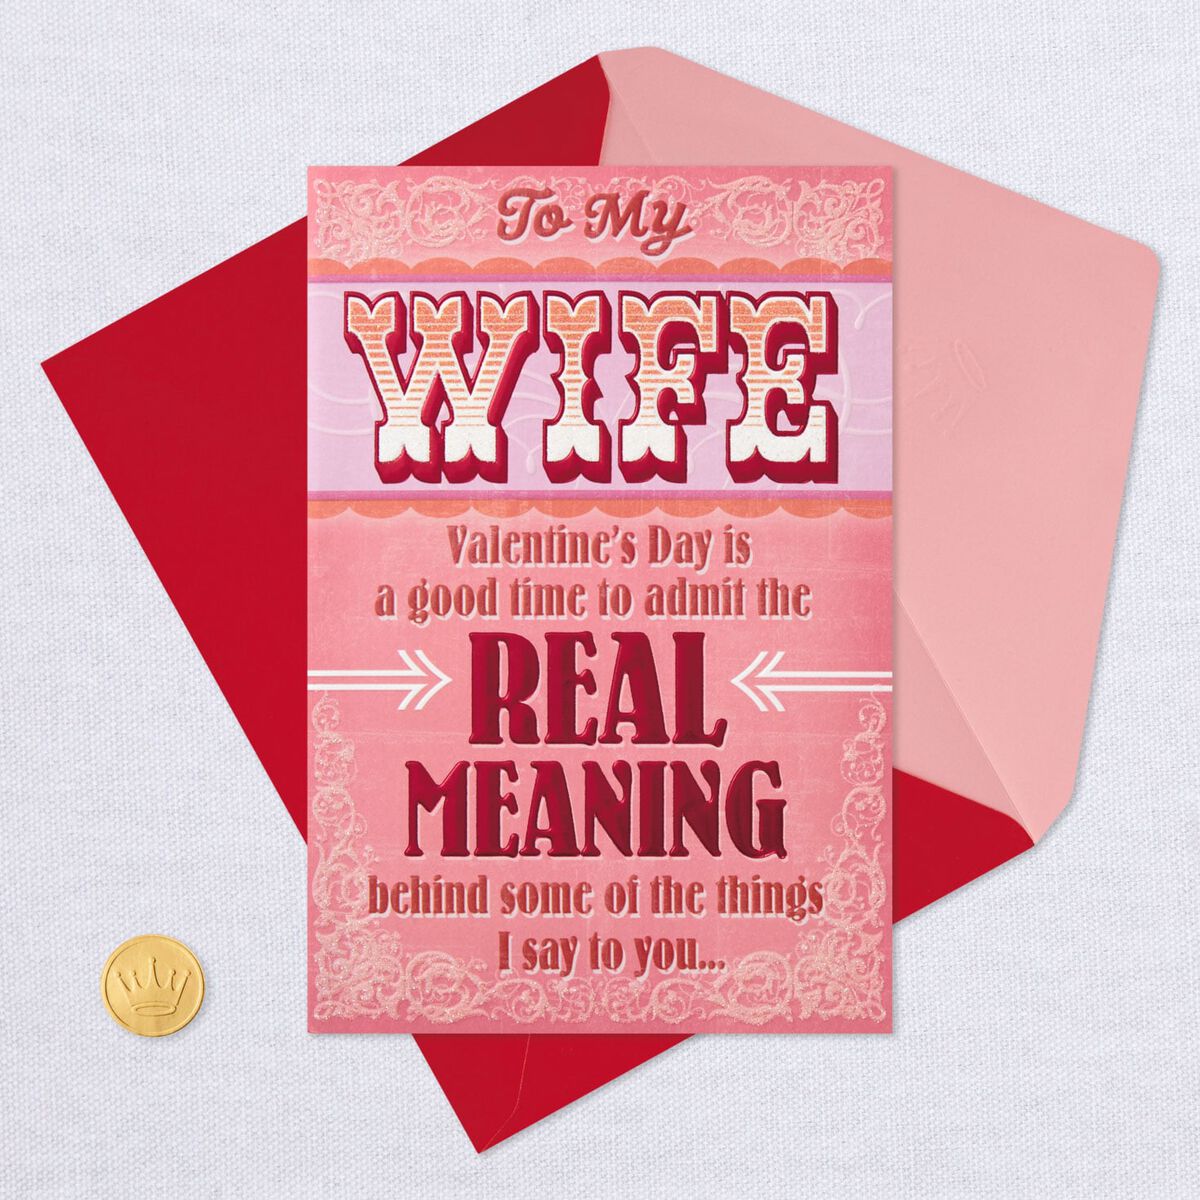 What I Really Mean Funny Valentines Day Card For Wife Greeting Cards Hallmark